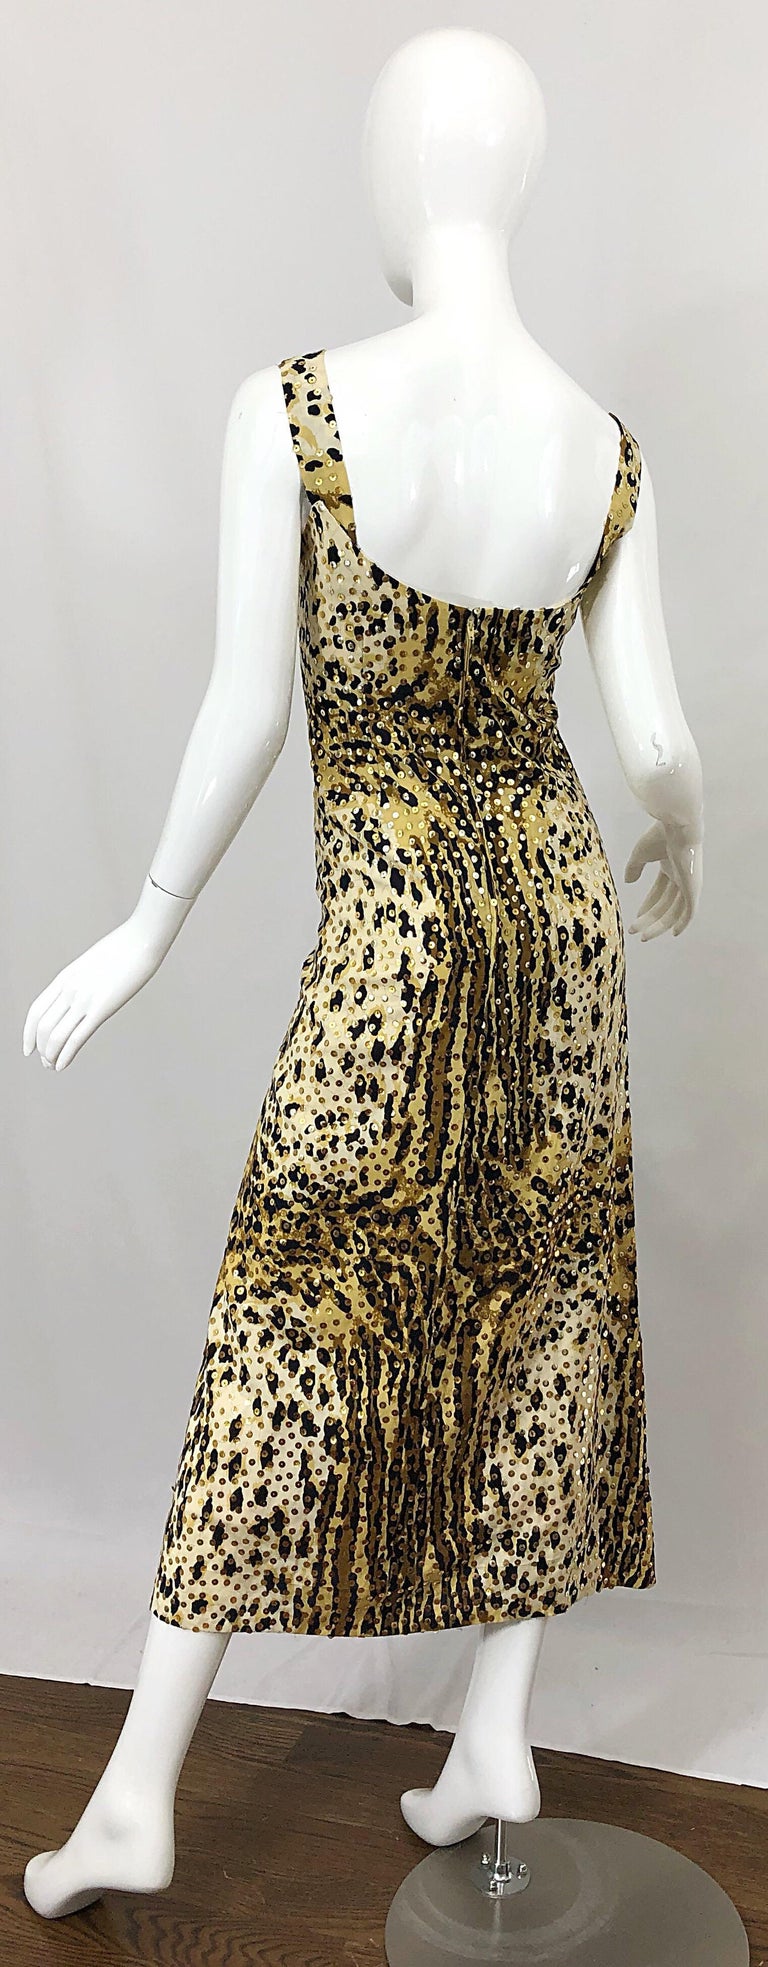 Mollie Parnis 1970s Leopard Cheetah Print Sequined Vintage 70s Cotton Midi Dress In Excellent Condition For Sale In San Diego, CA